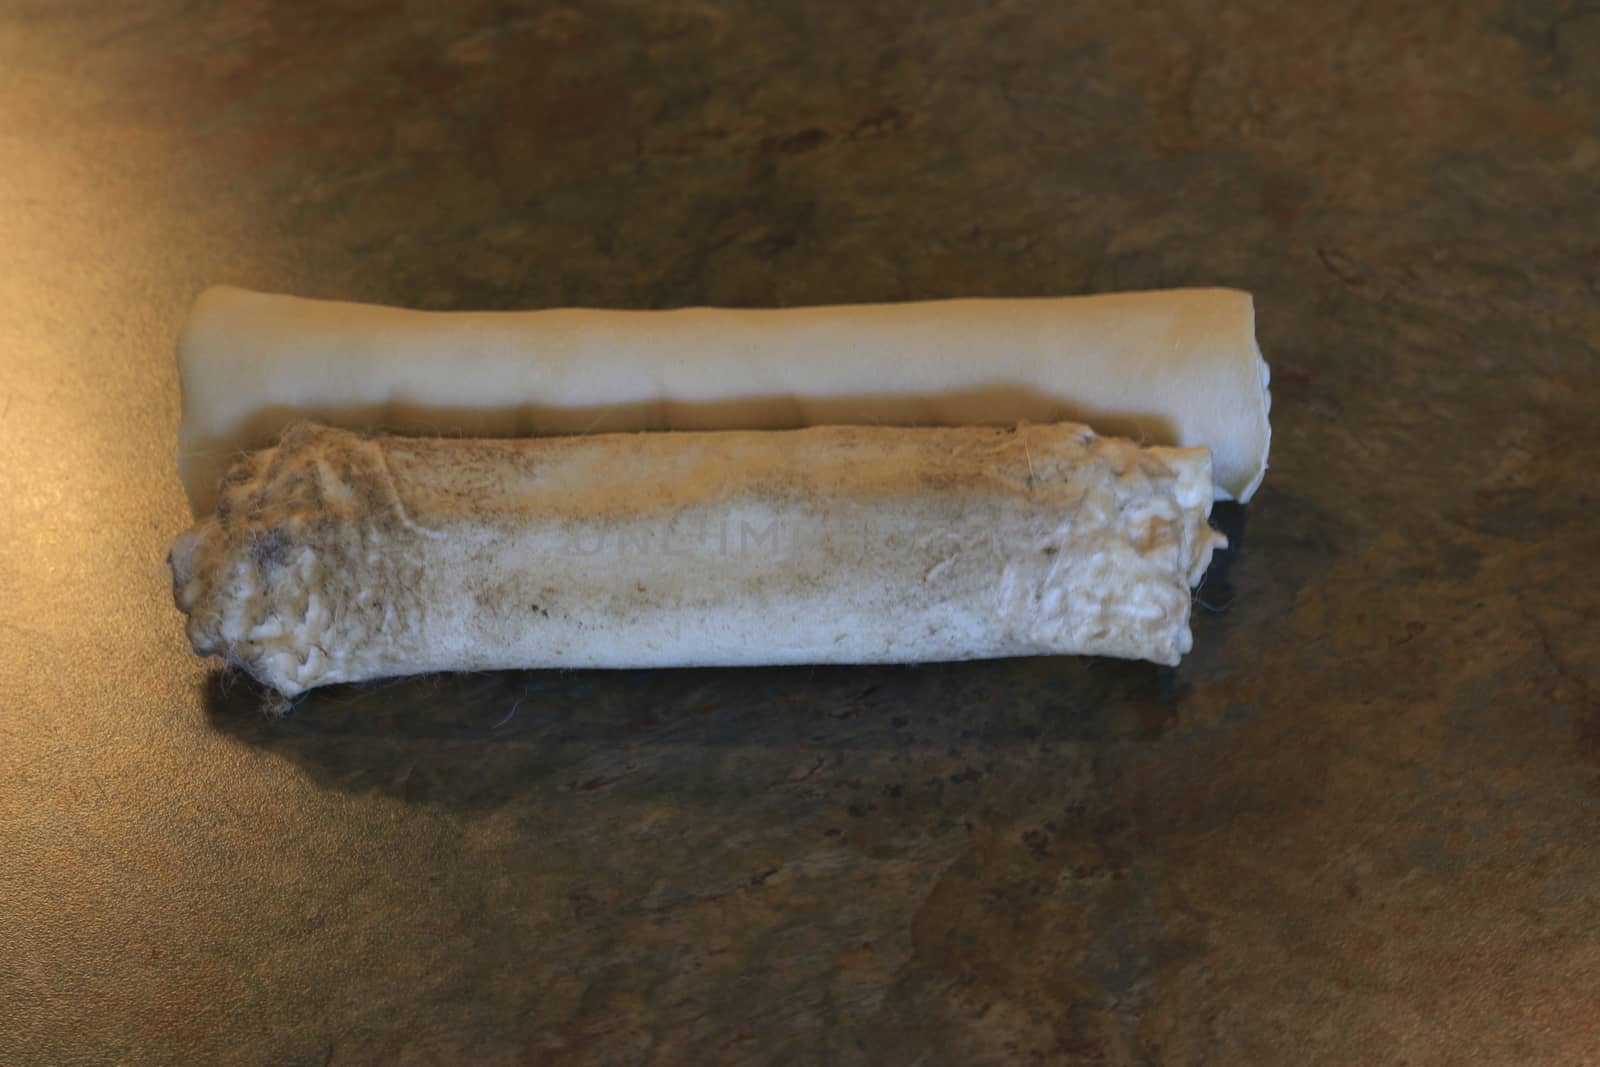 rawhide is considered a controversial dog chew due to the risk of dogs choking. Photo showing partly chewed rawhide by mynewturtle1